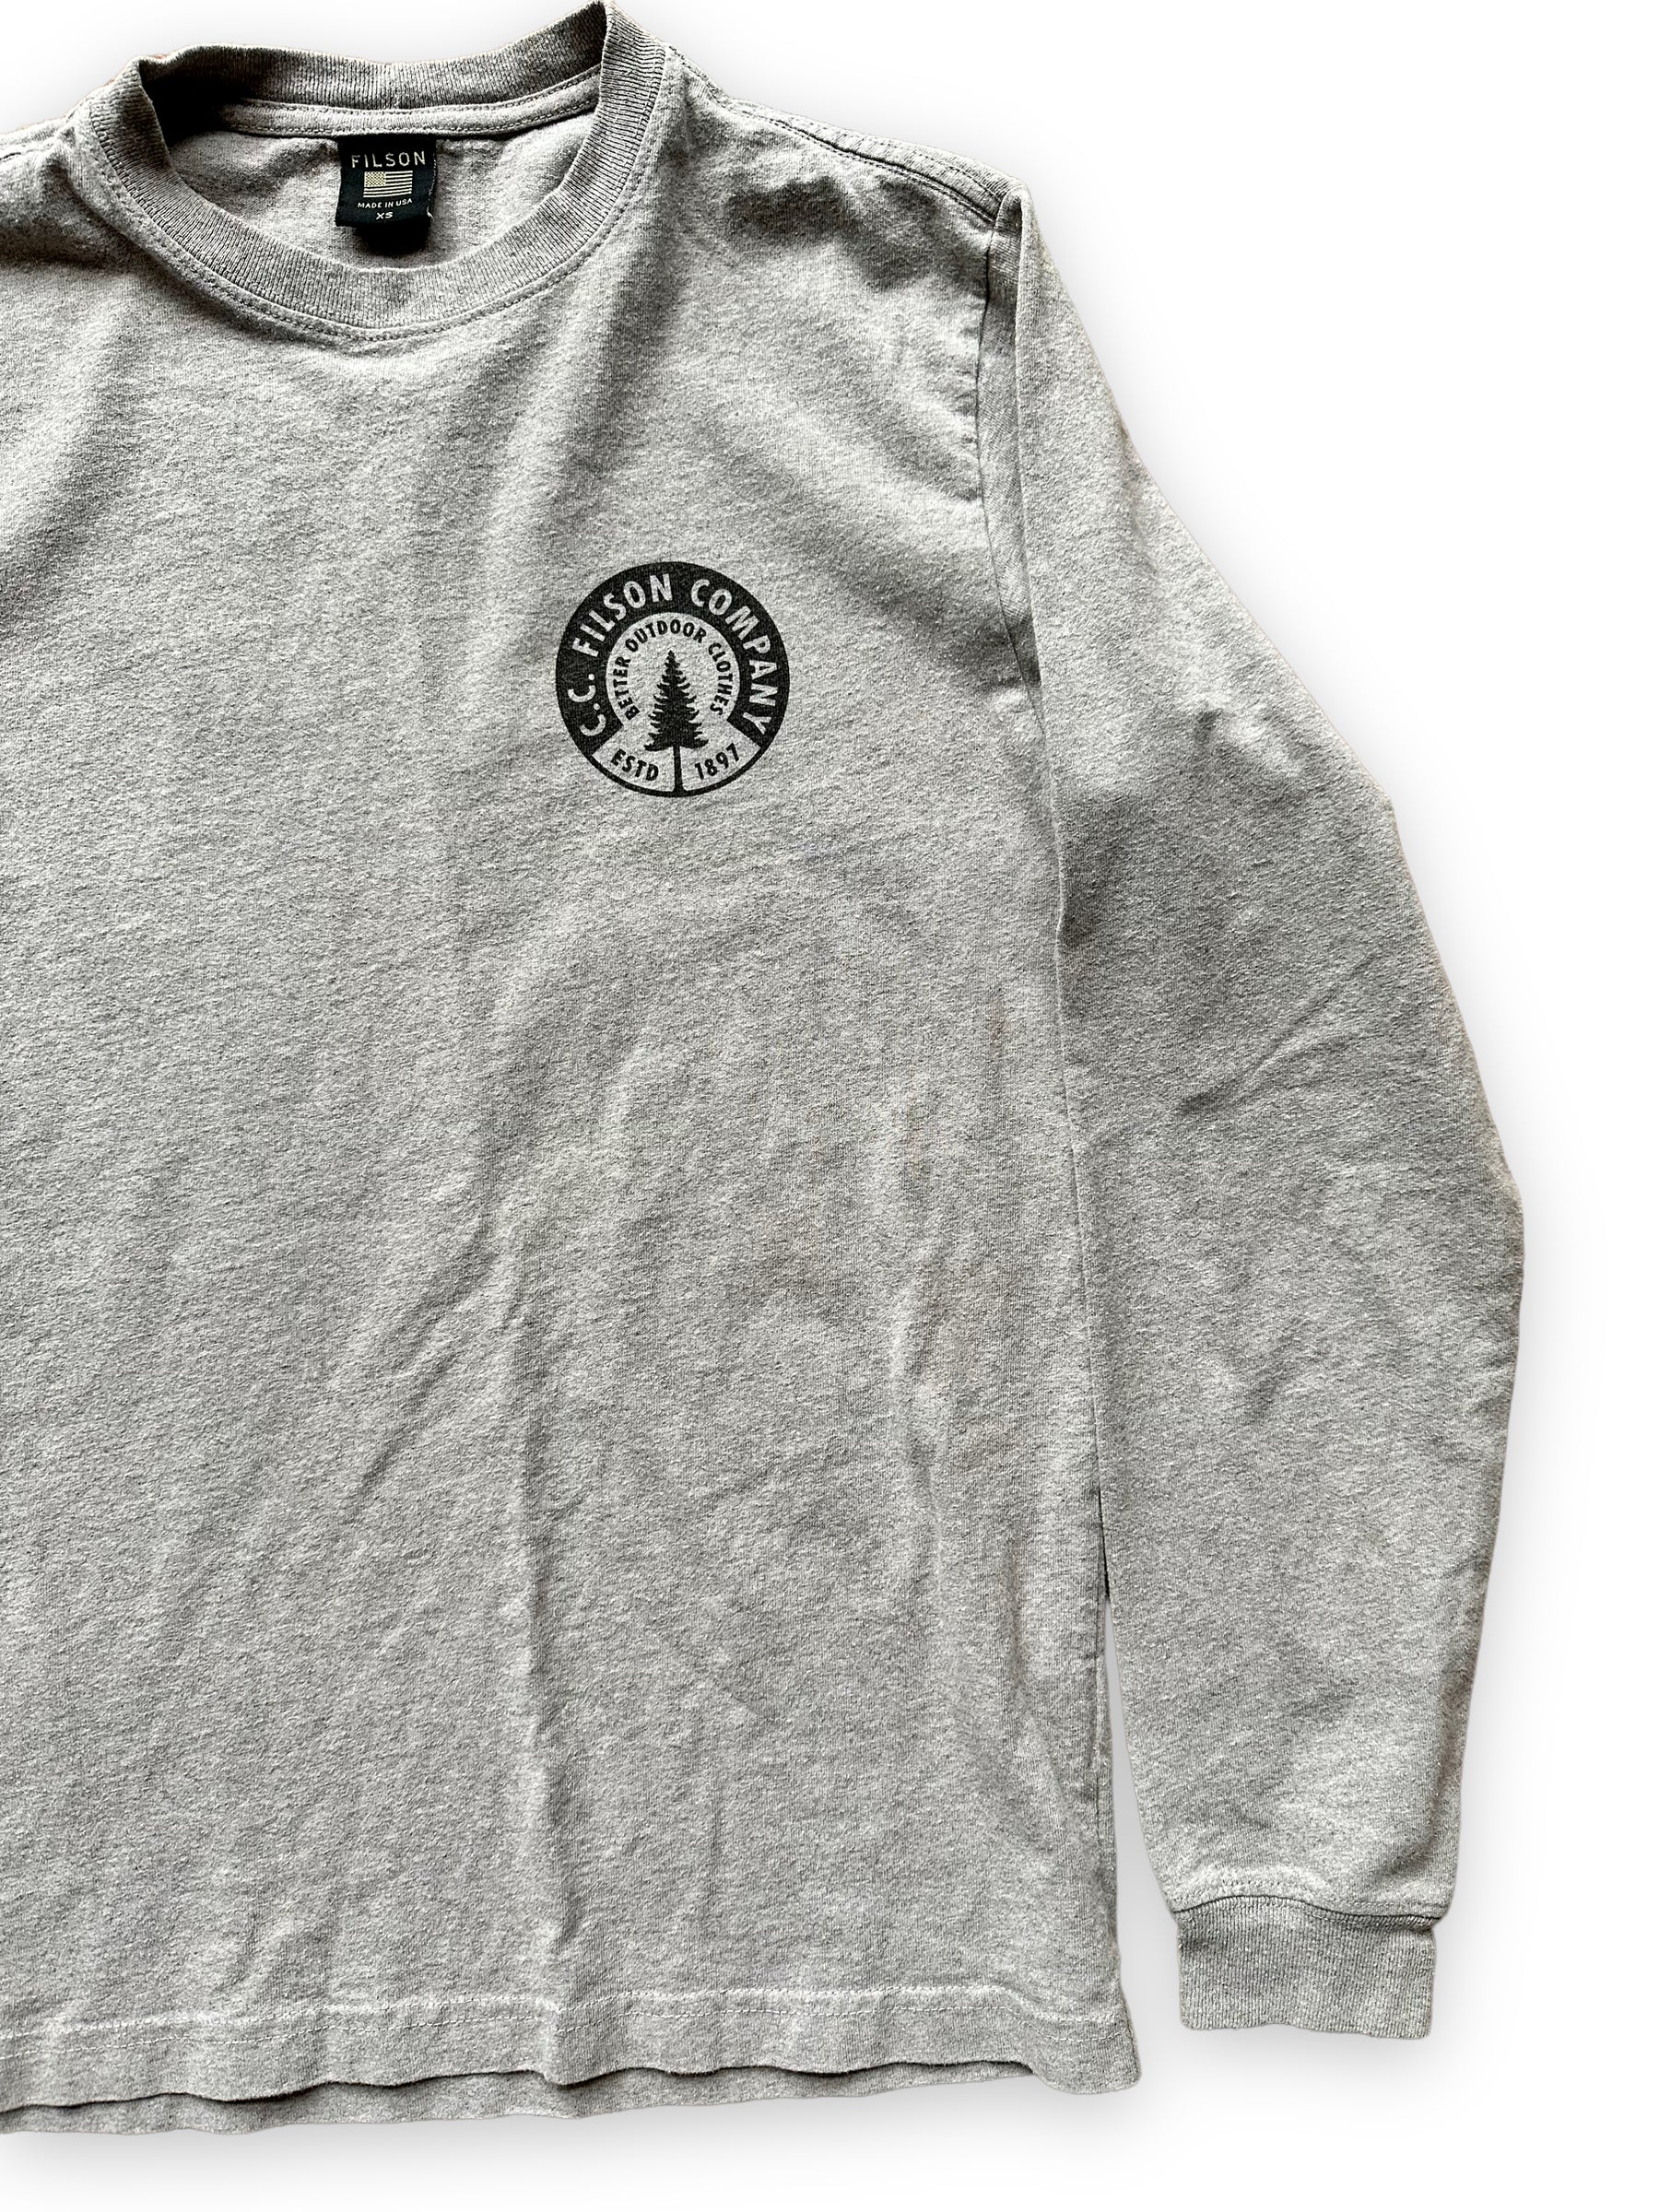 Front Left View of Filson Long Sleeve Heather Grey Tee SZ XS  |  Barn Owl Vintage Goods | Filson Graphic Tees Seattle